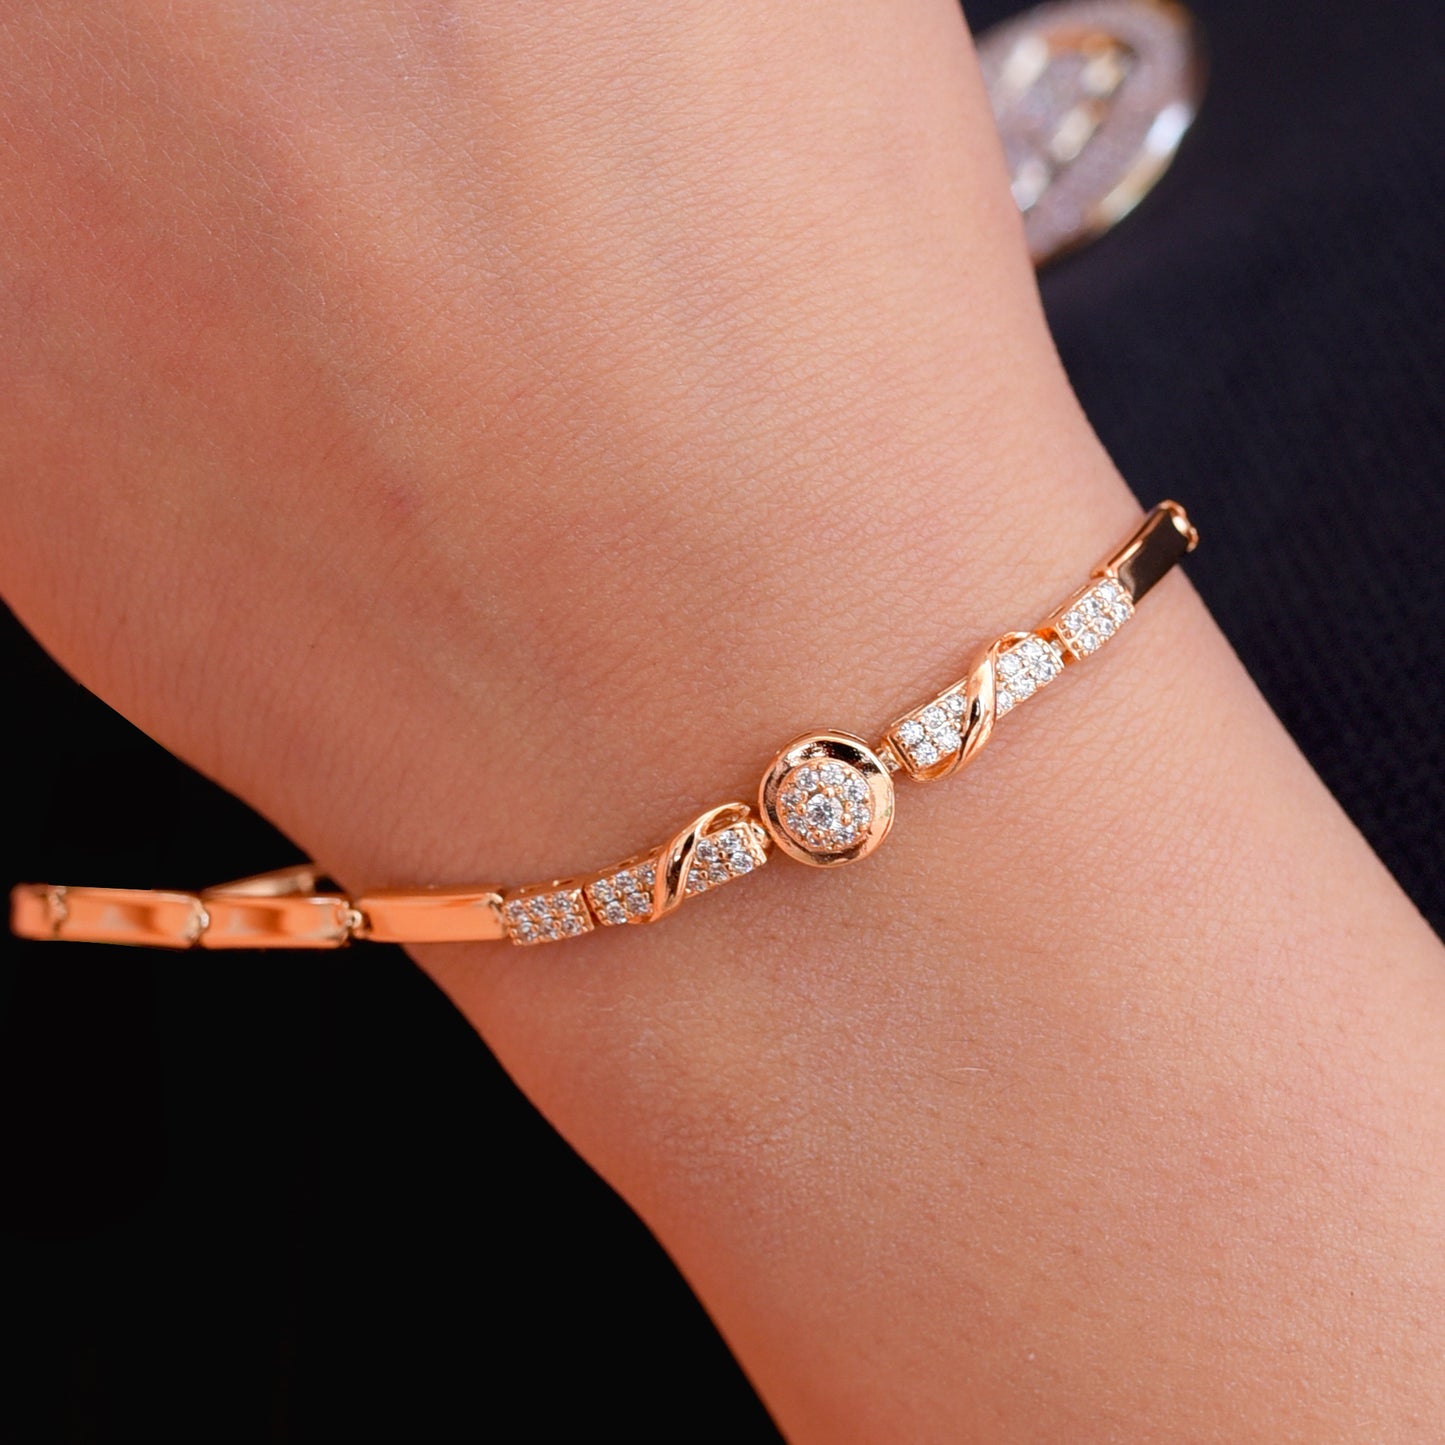 Image of (Dynamic Bracelet) from an exquisite collection by Al Musk Jewellery.